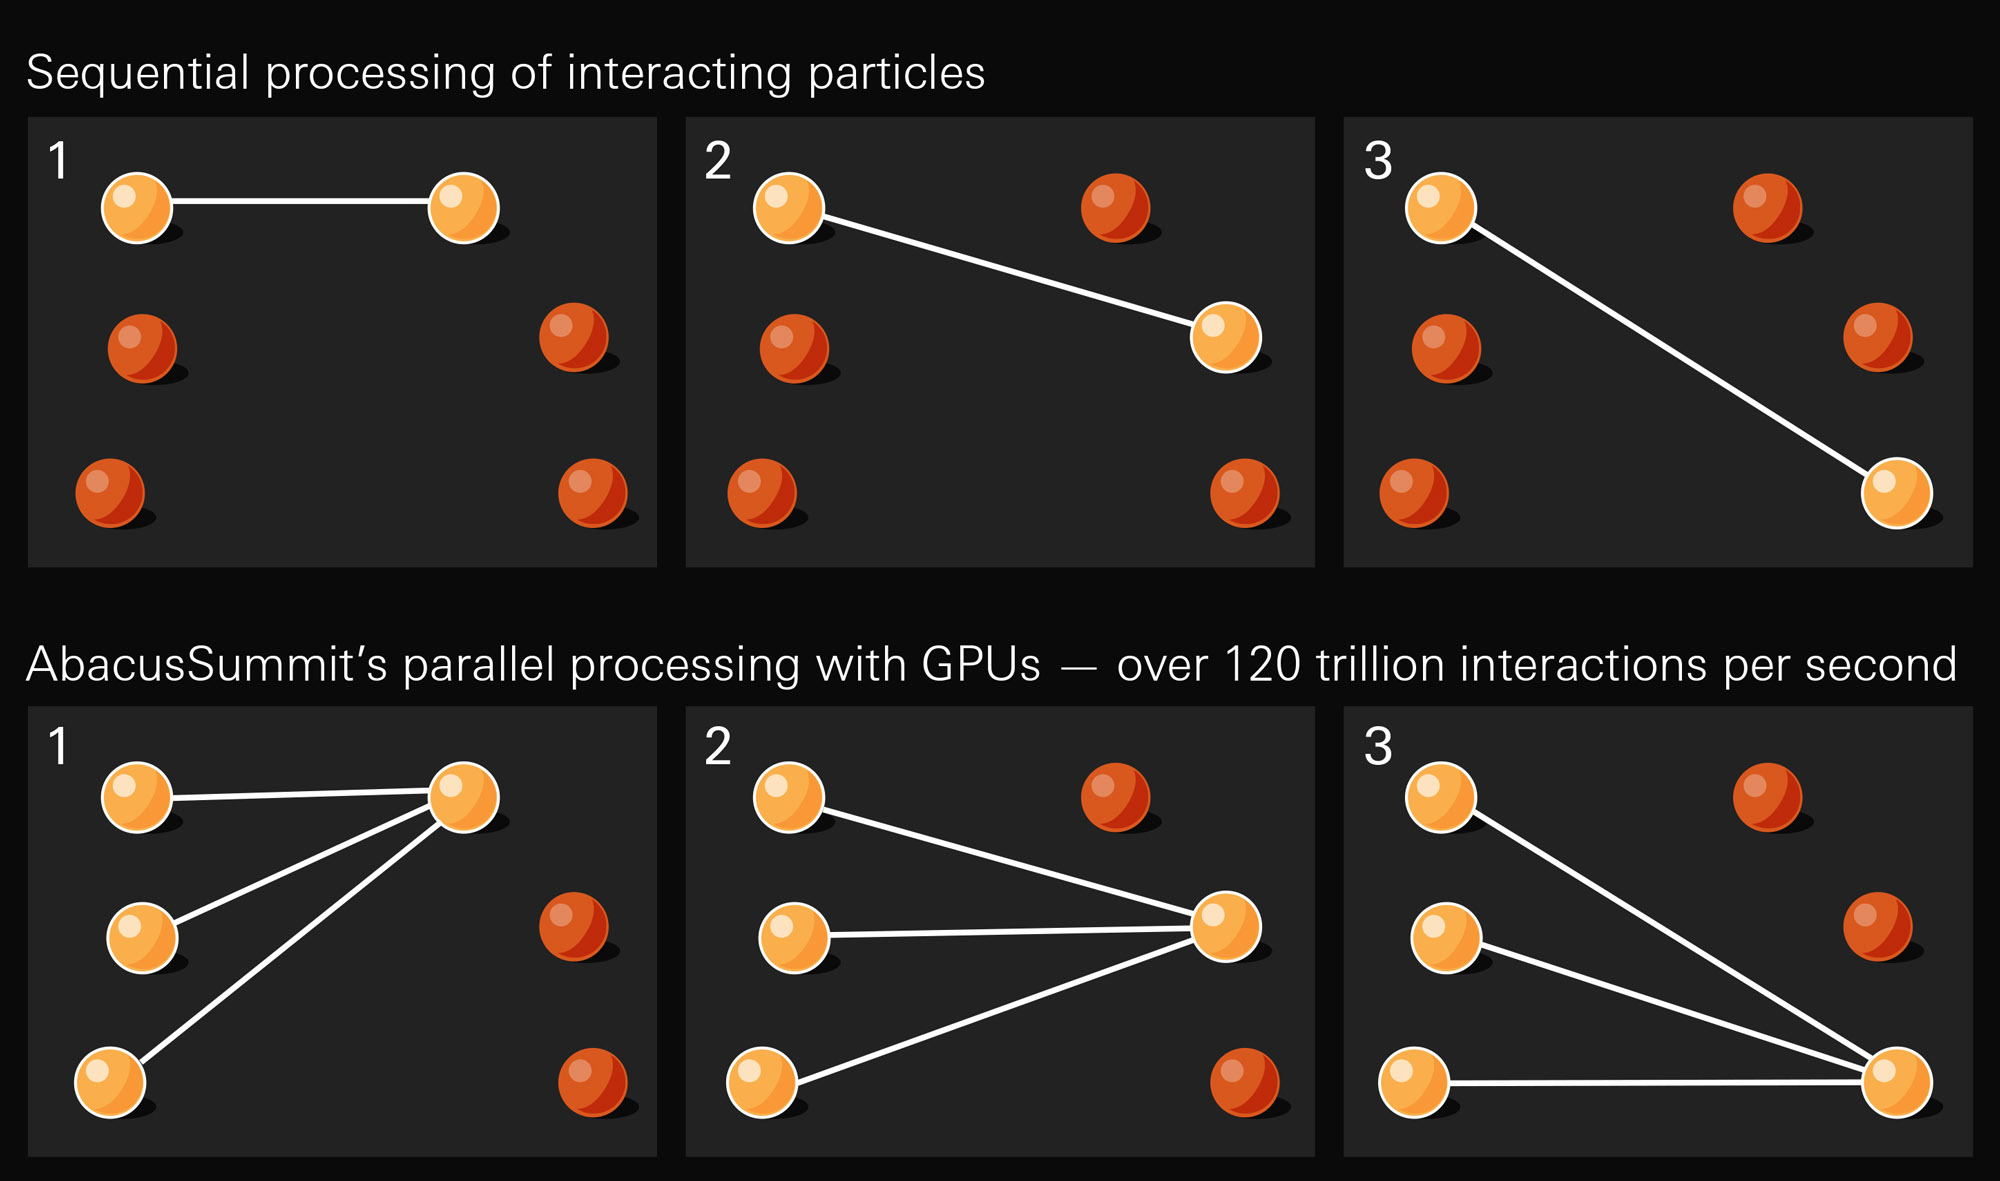 Abacus leverages parallel computer processing to drastically speed up its calculations of how particles move about due to their gravitational attraction. A sequential processing approach (top) computes the gravitational tug between each pair of particles one by one. Parallel processing (bottom) instead divides the work across multiple computing cores, enabling the calculation of multiple particle interactions simultaneously.